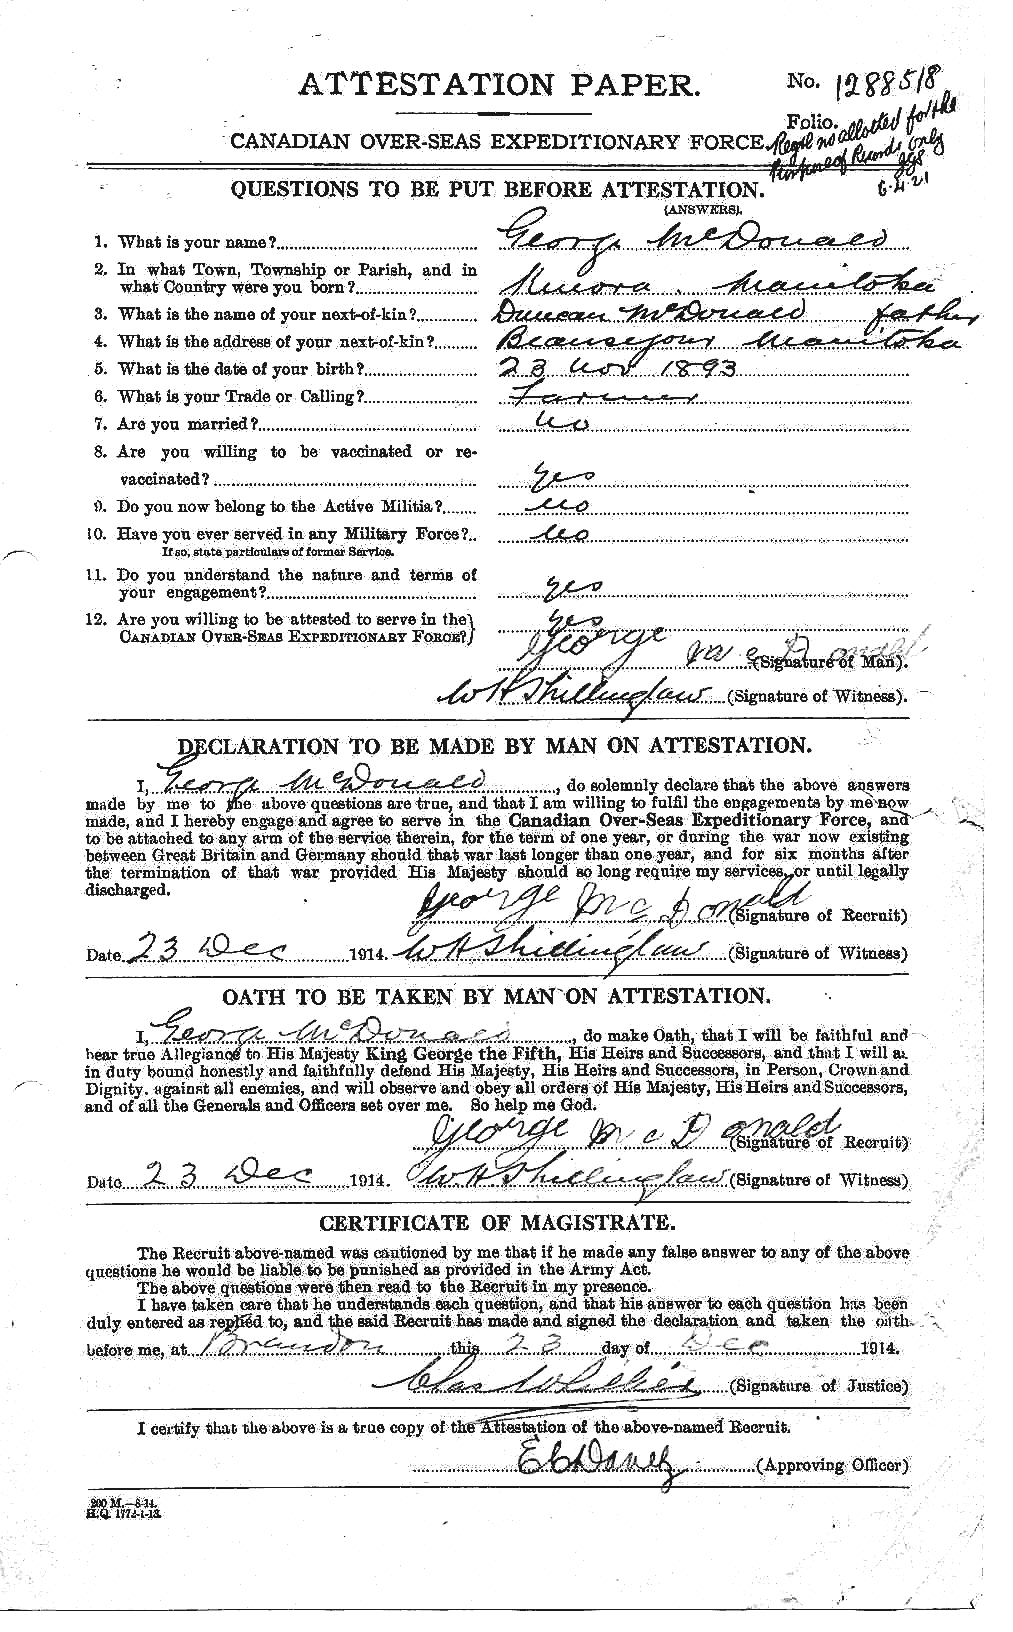 Personnel Records of the First World War - CEF 518784a